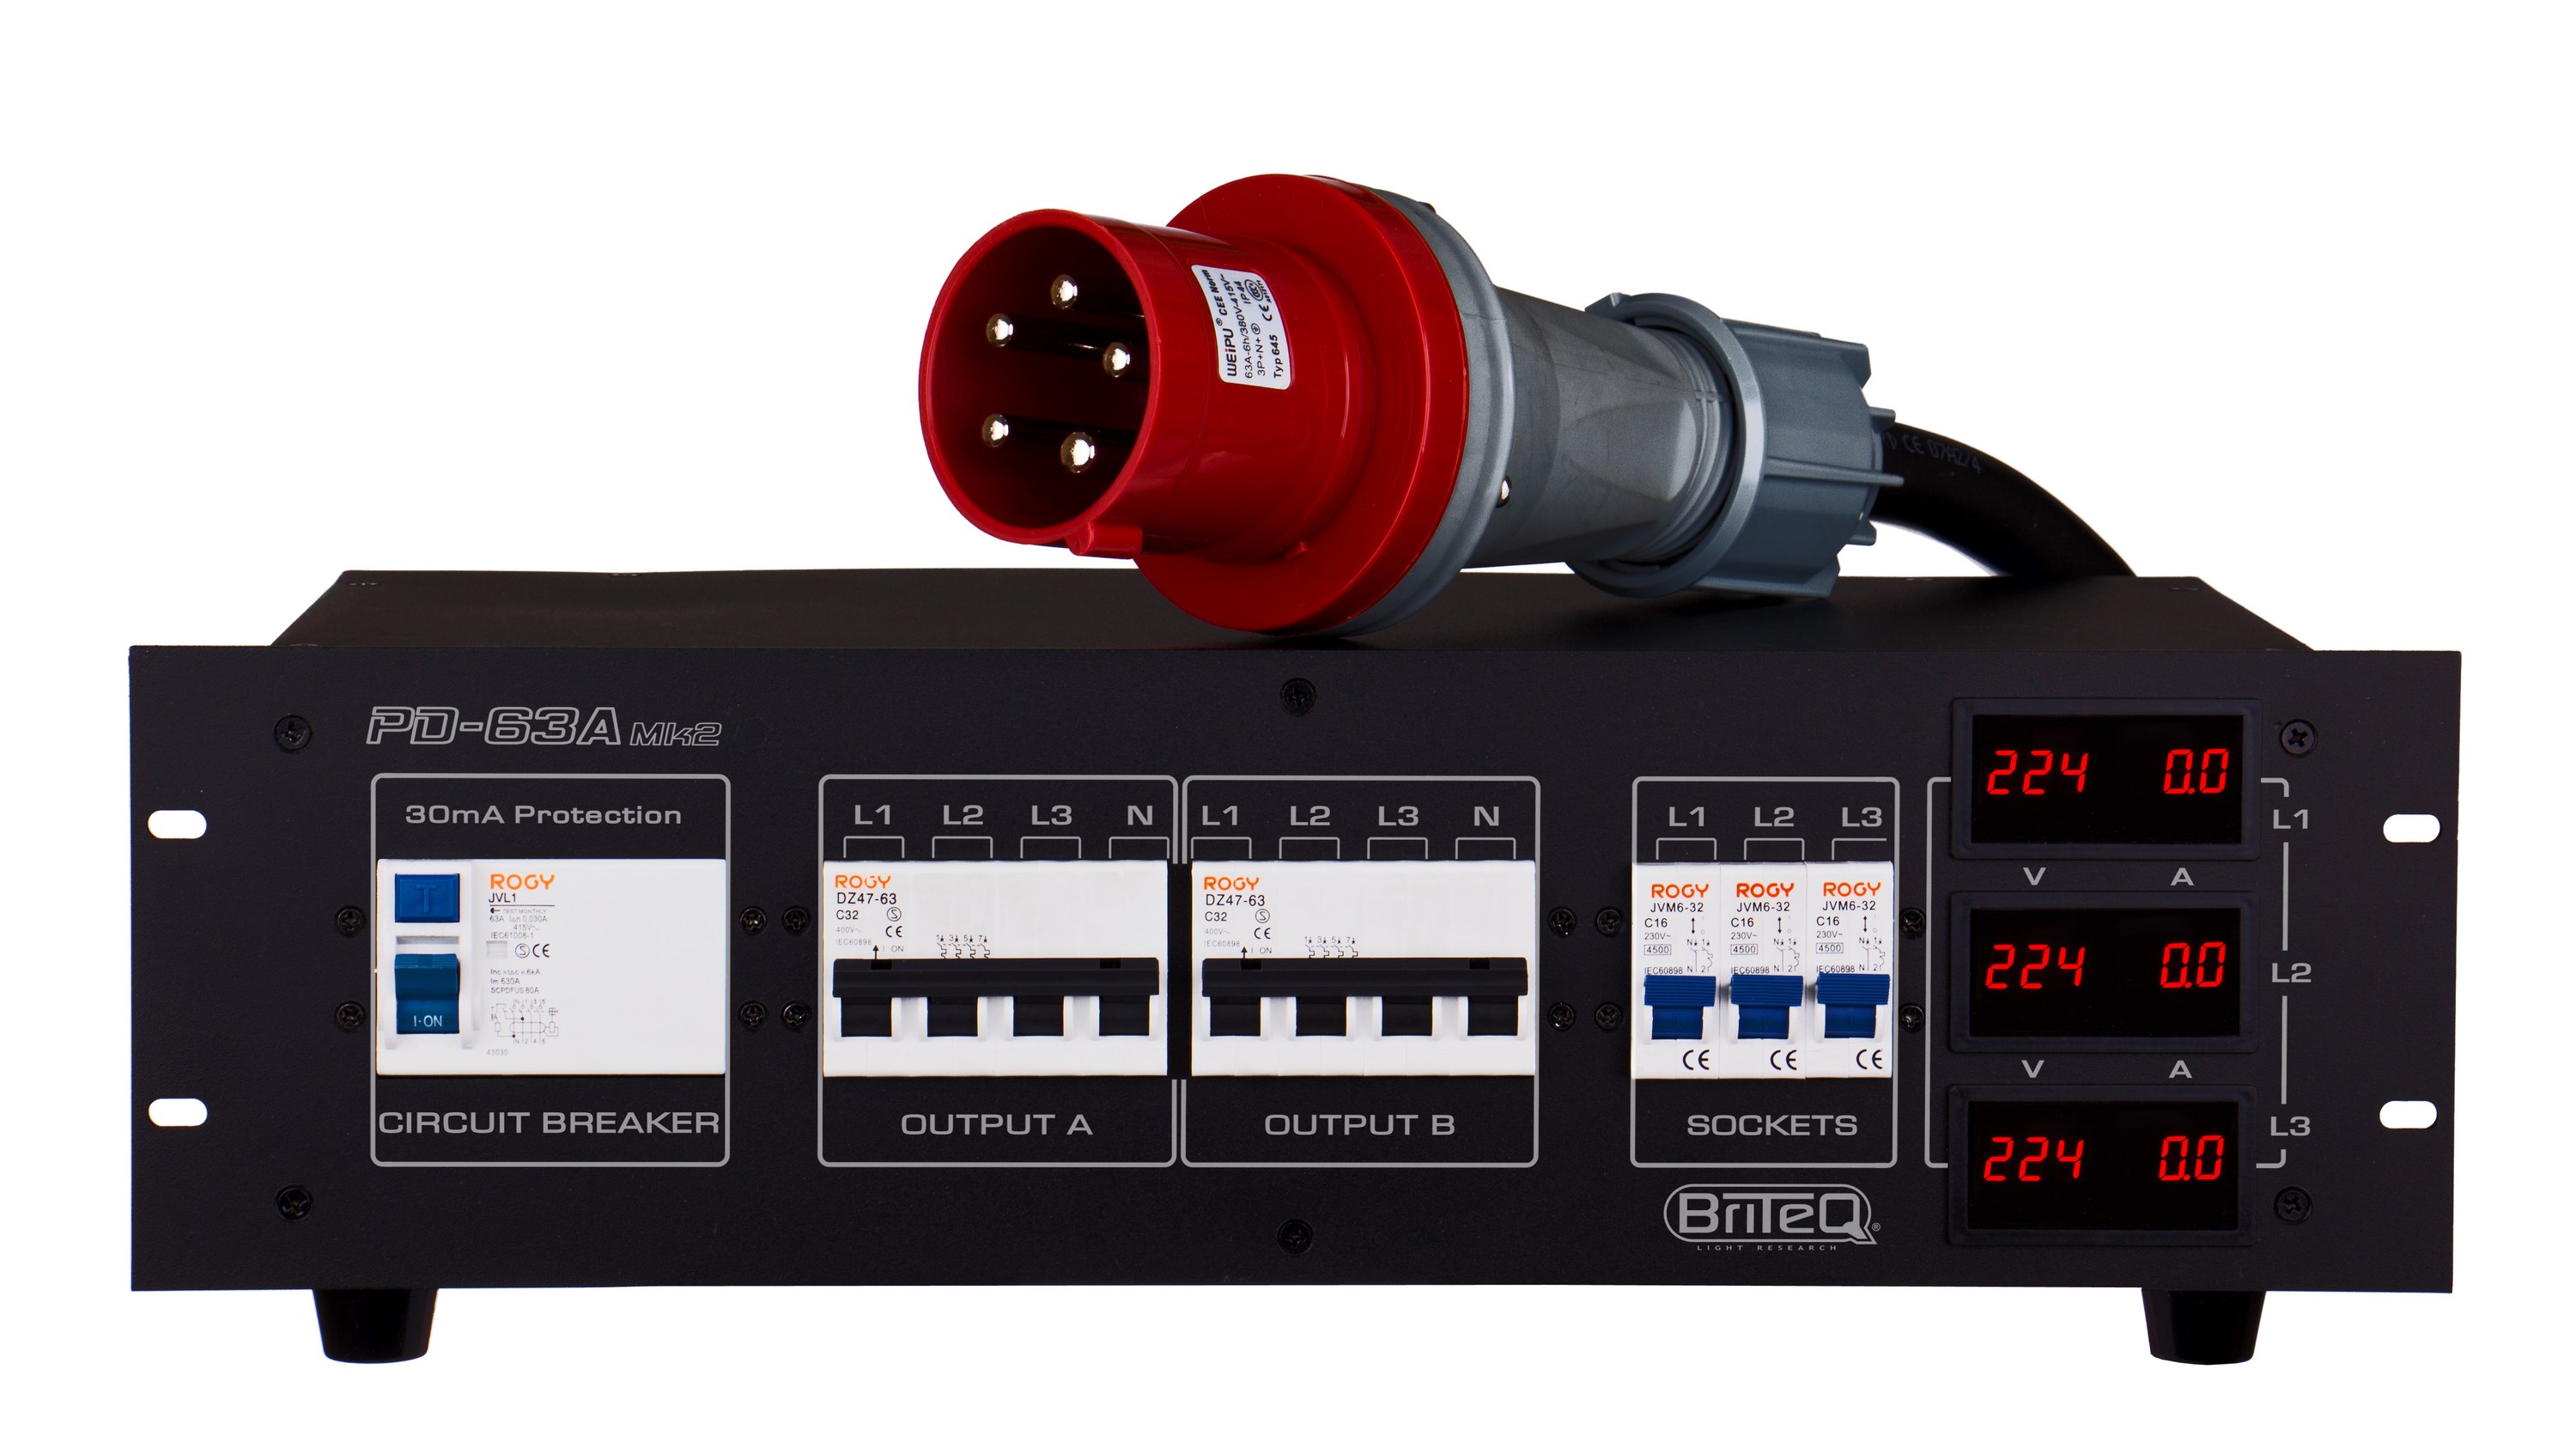 This 3-phase power distributor is designed to improve safety in both mobile, rental and fixed installations.